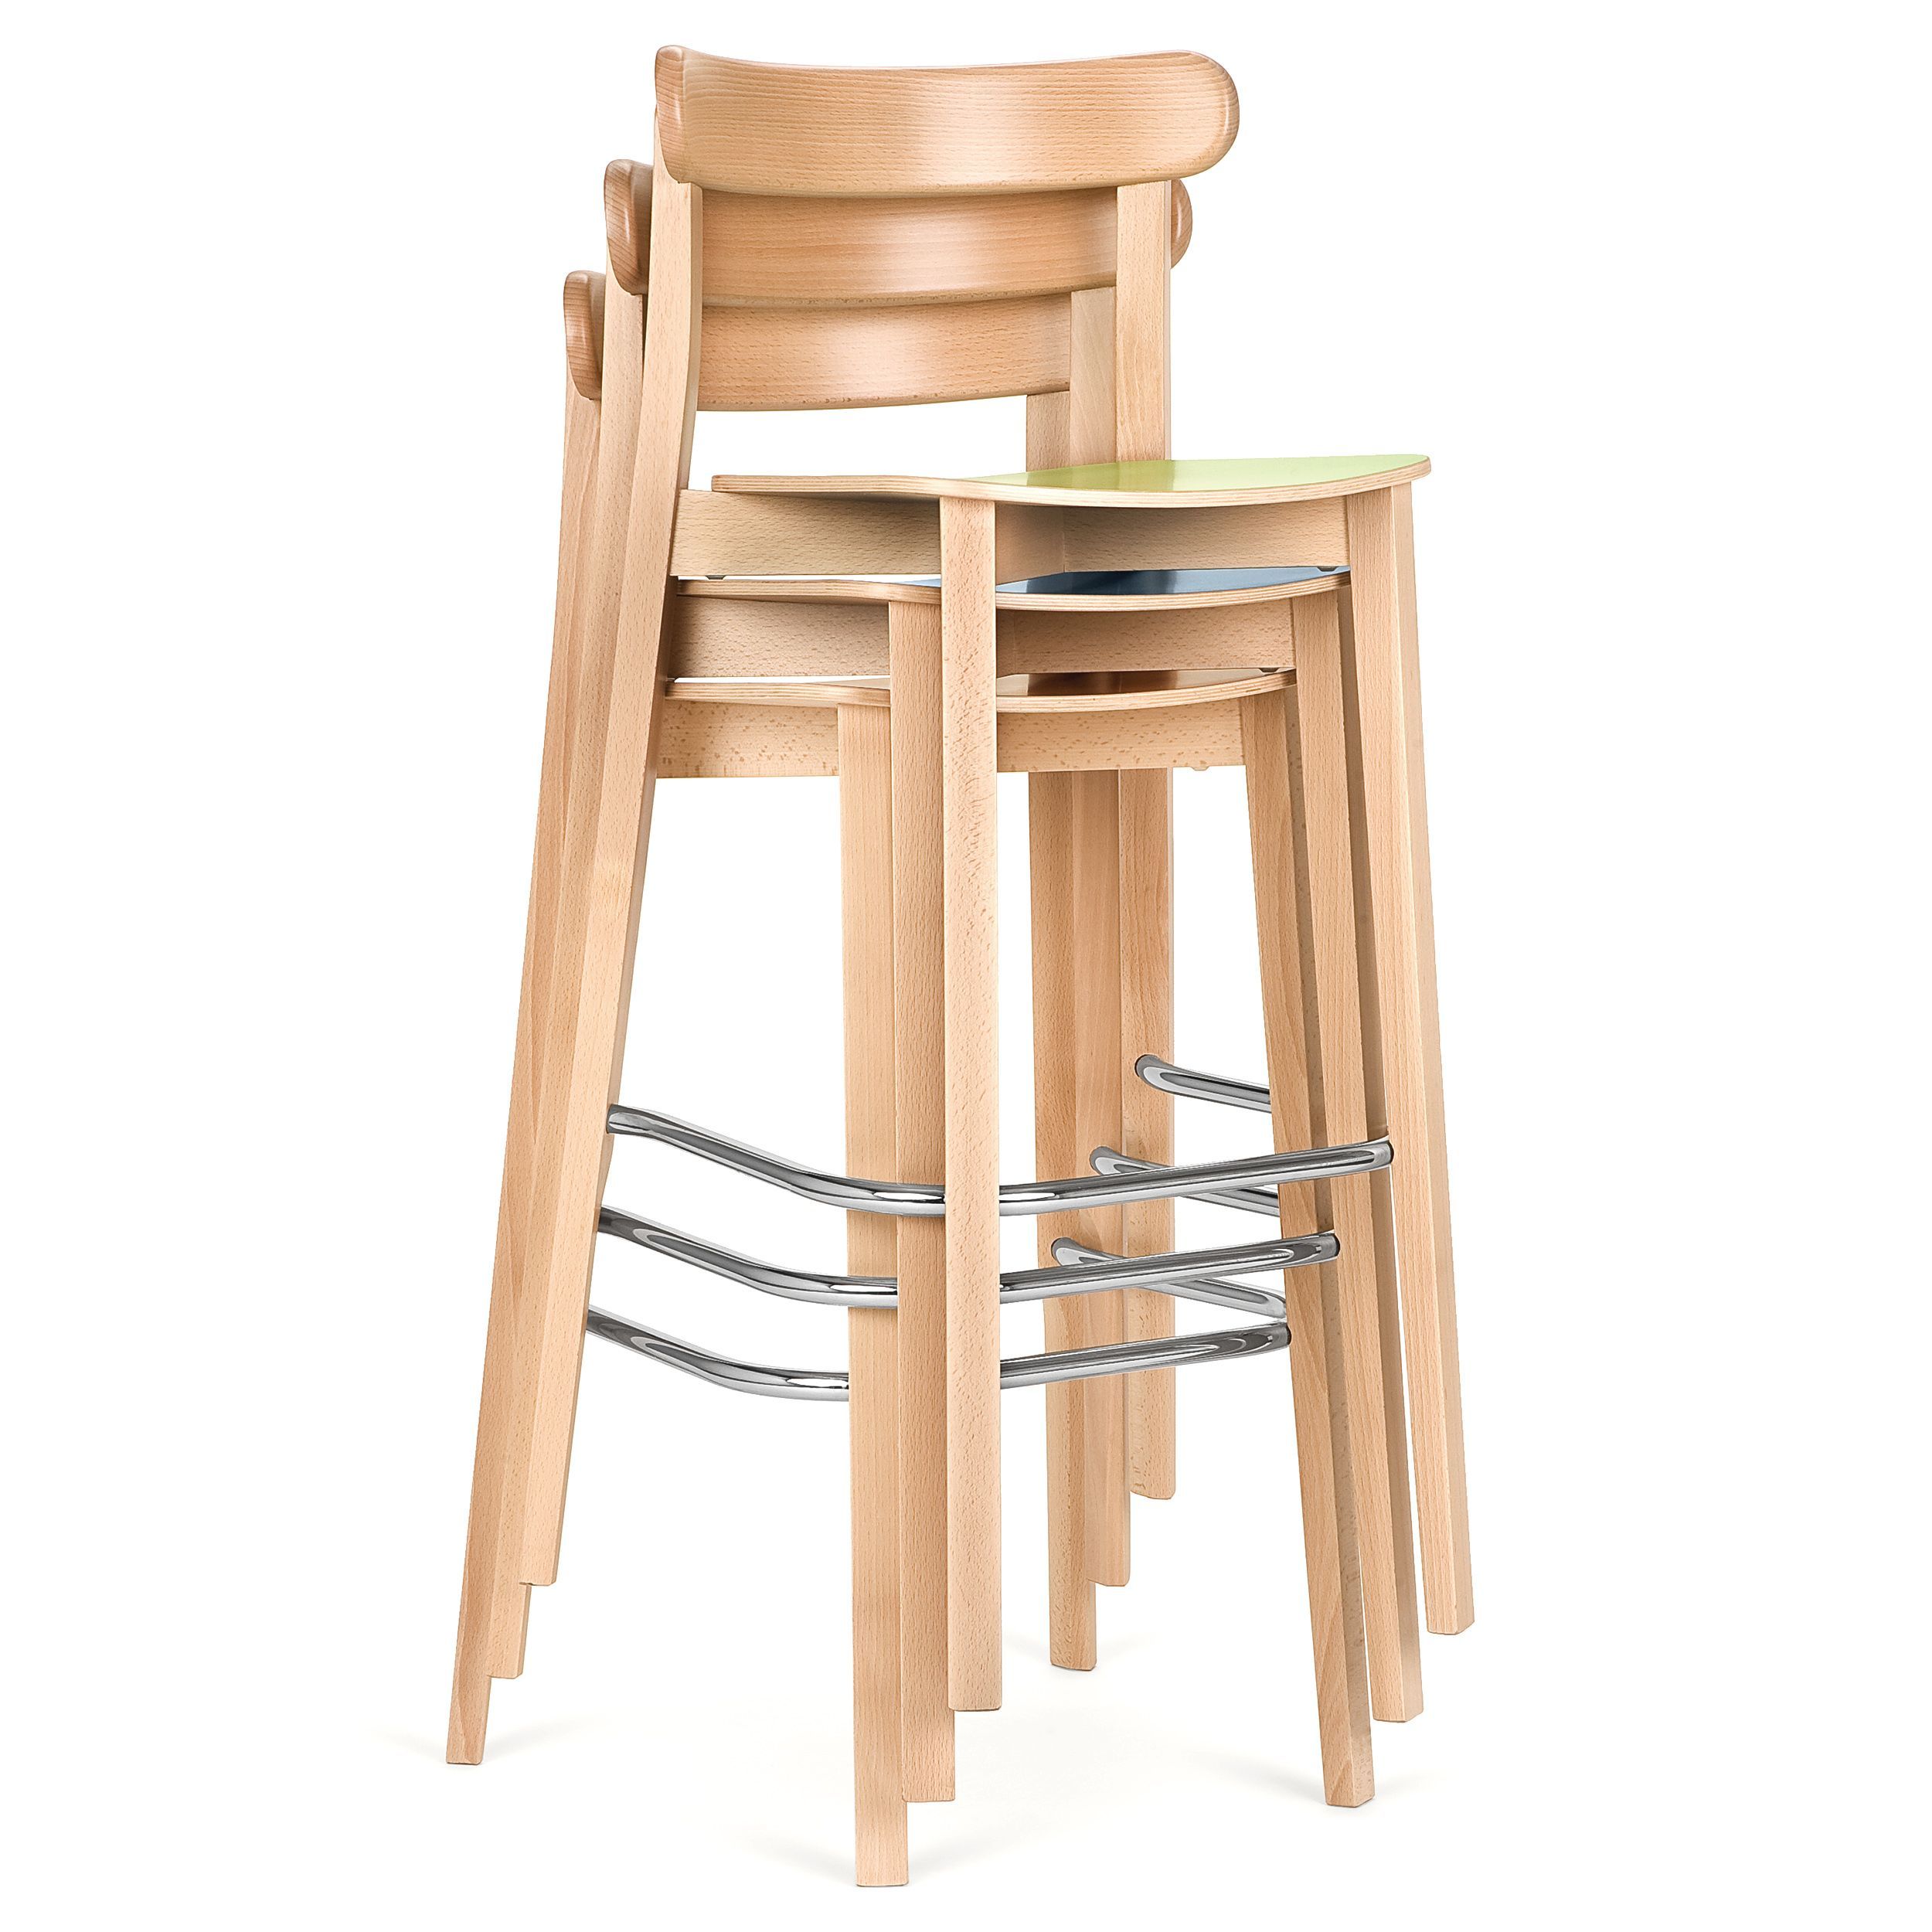 Bar Stool H-4420 ICHO by Paged